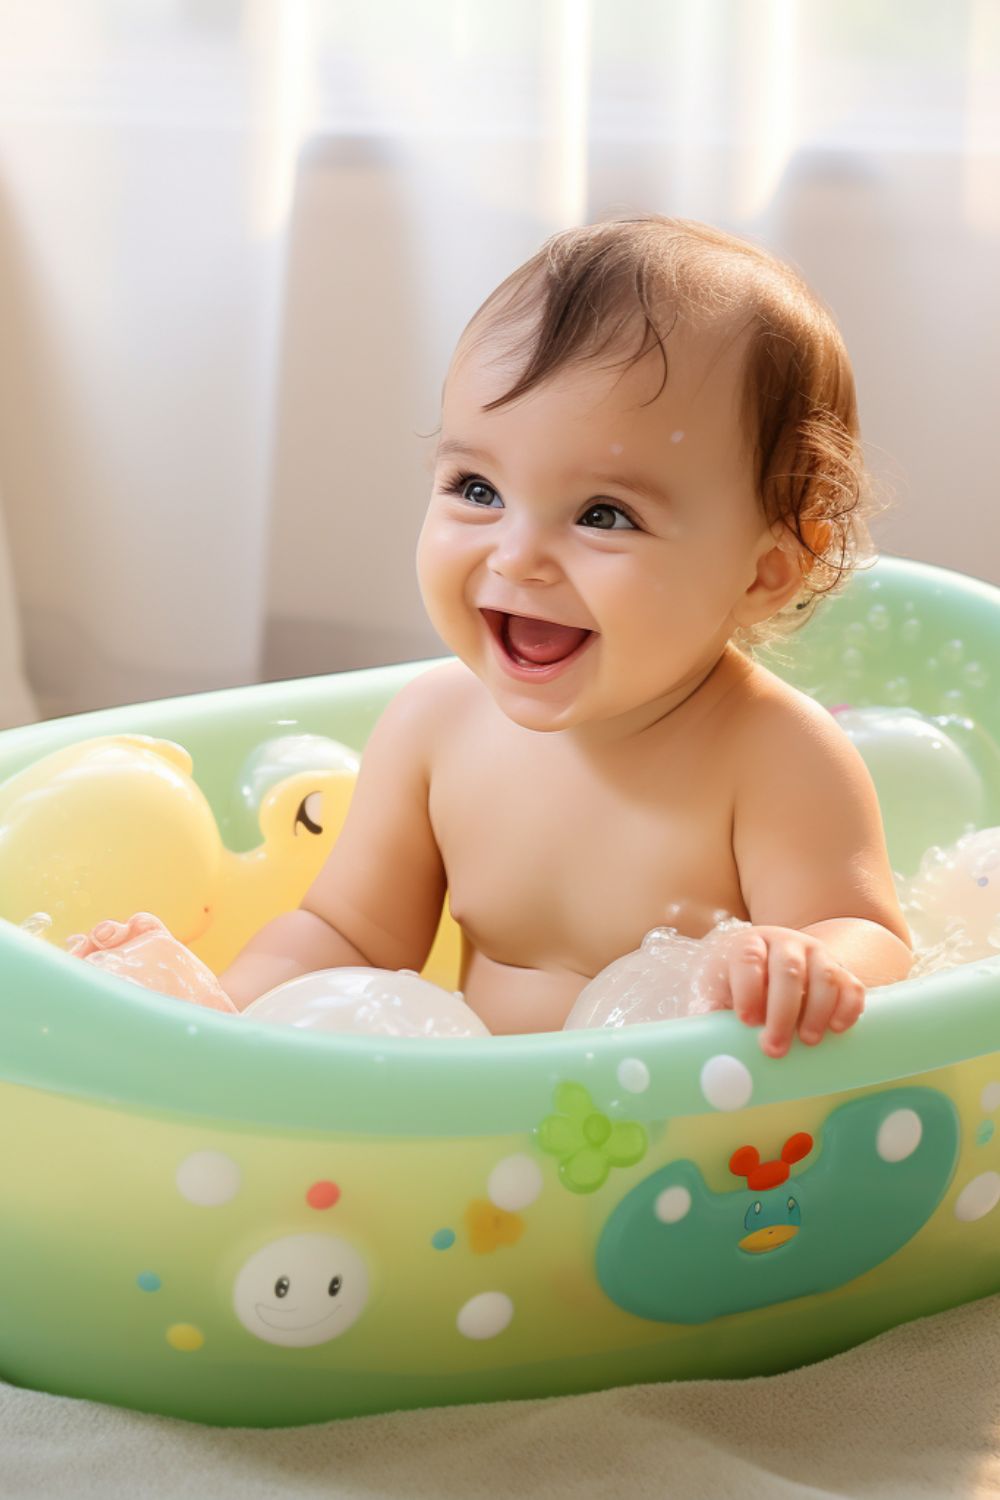 How to Store Baby Bathtub